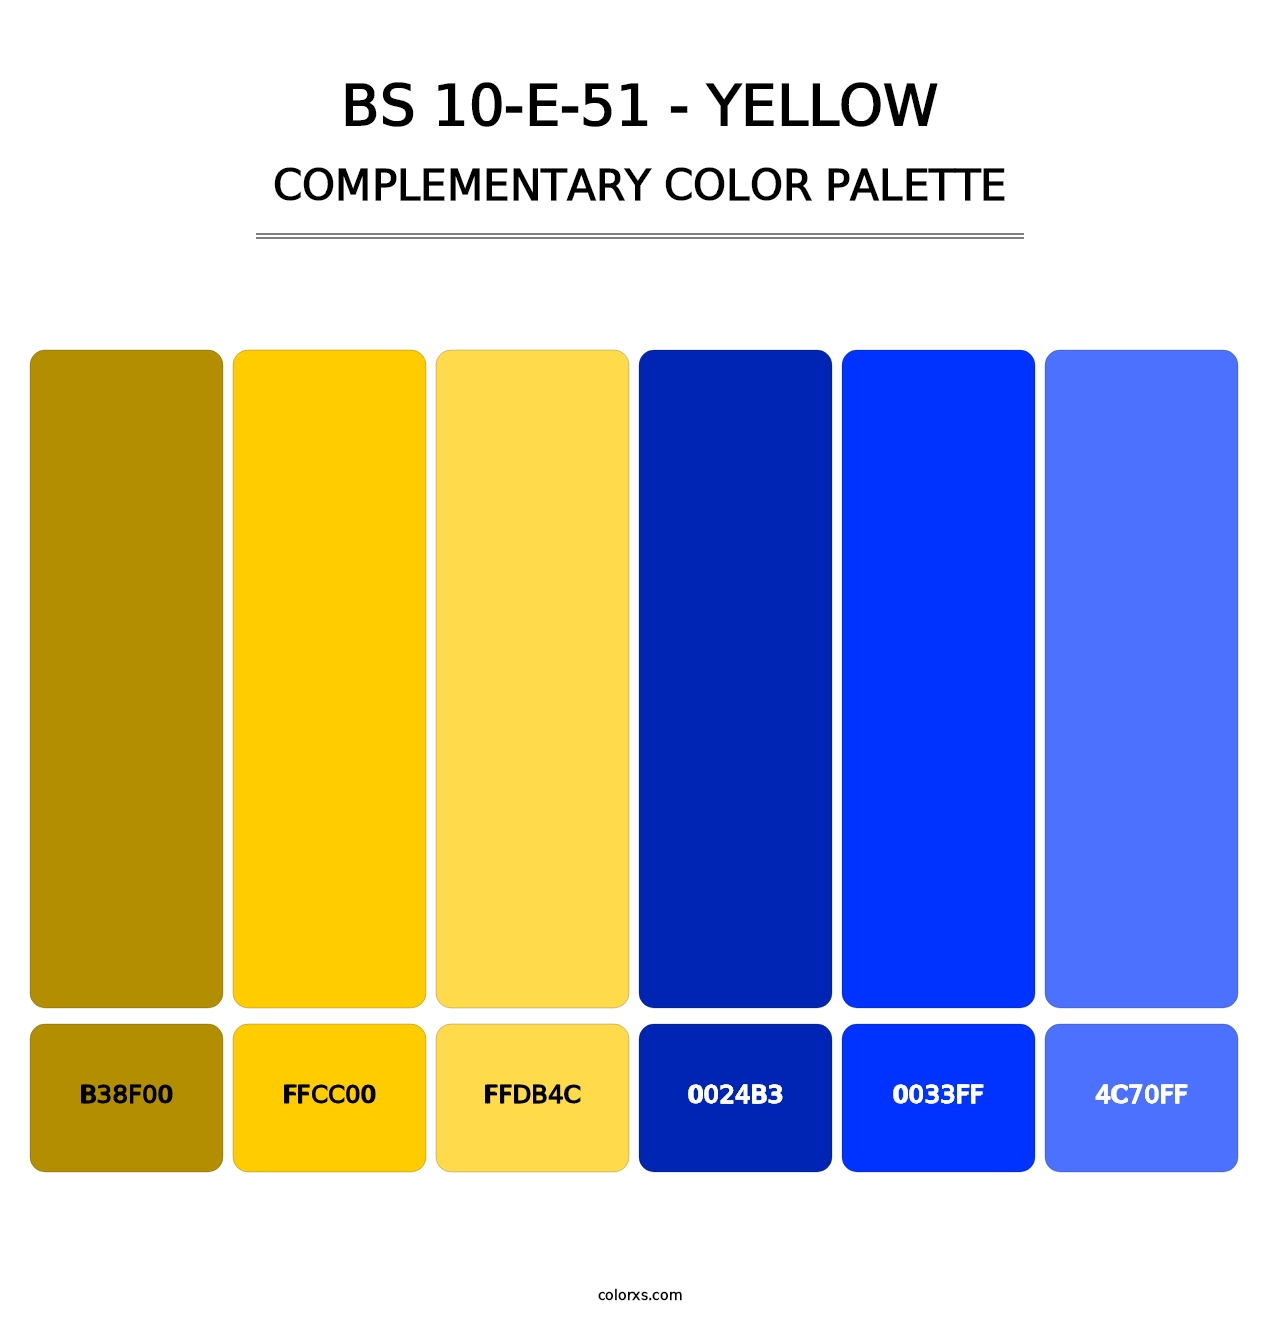 BS 10-E-51 - Yellow - Complementary Color Palette